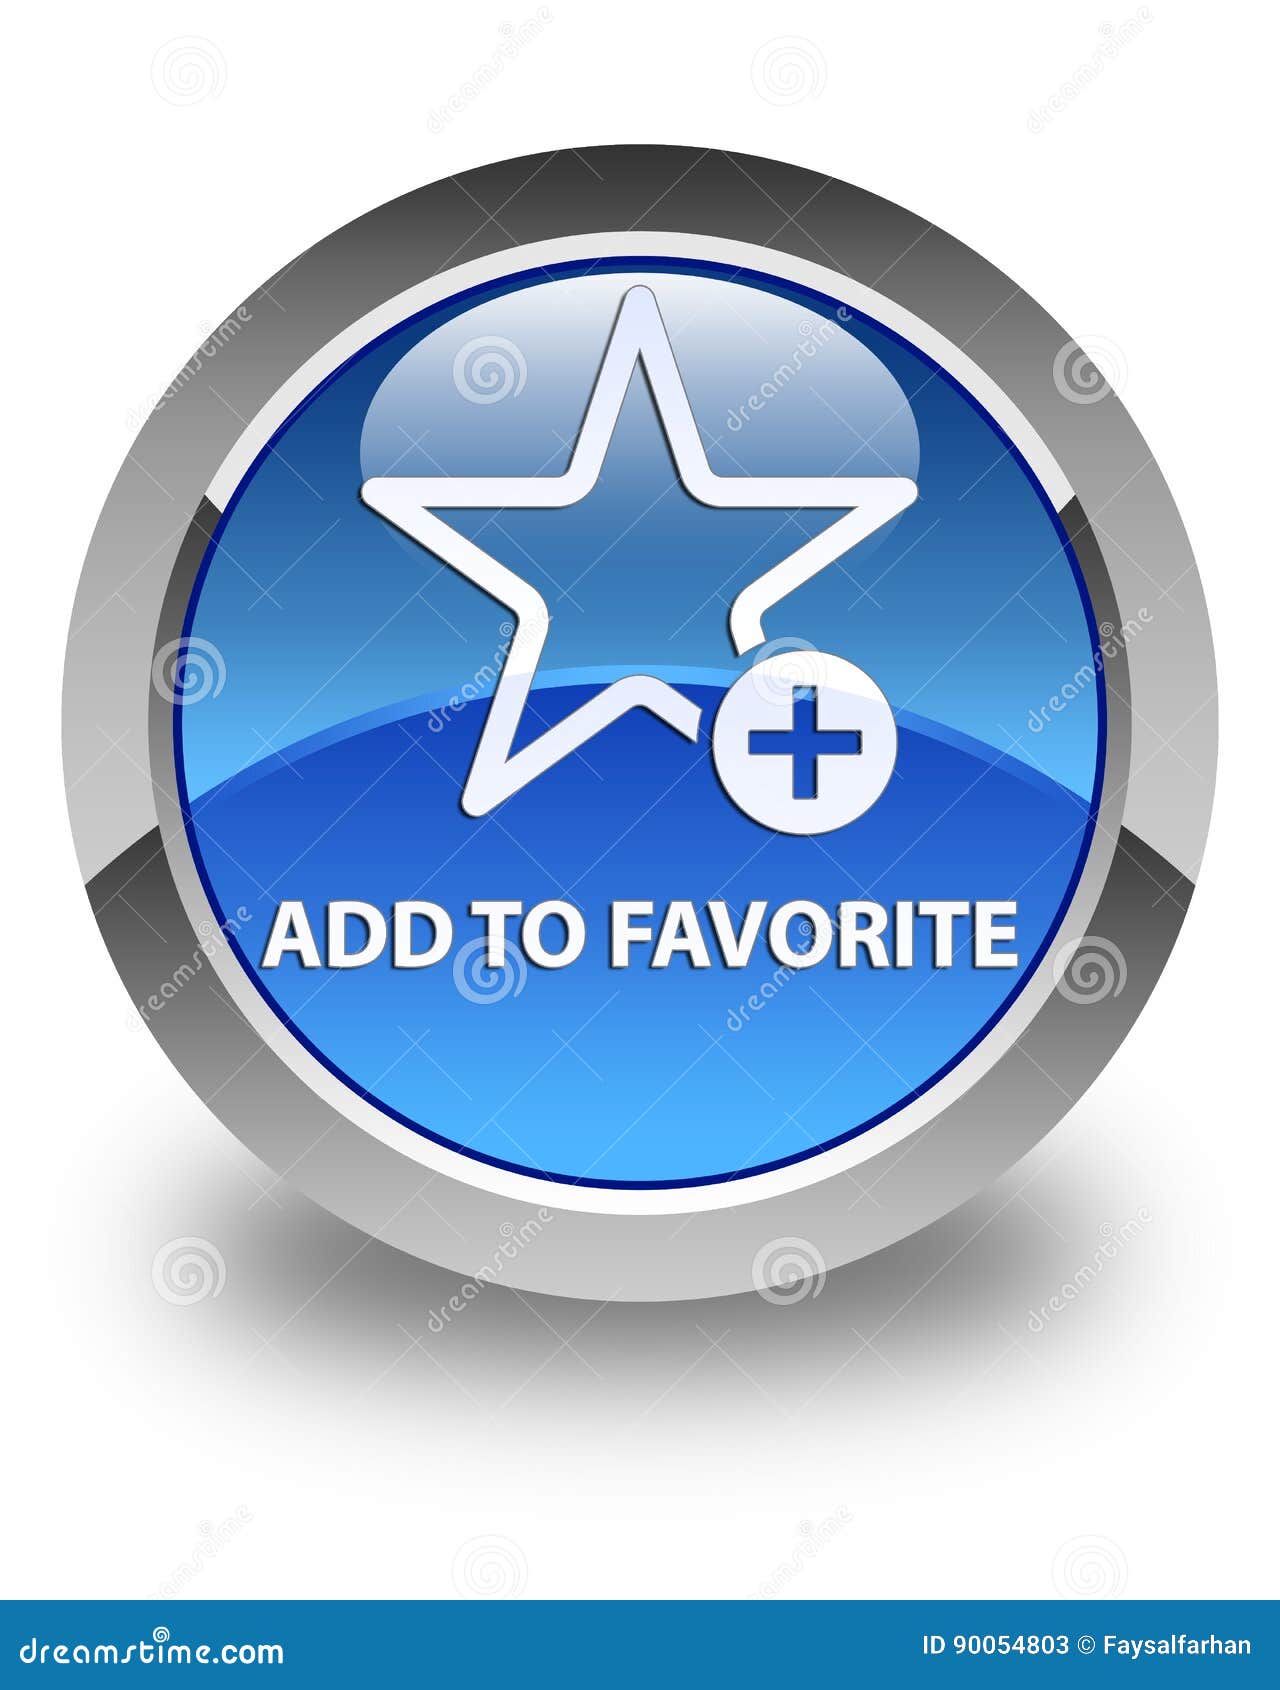 Add To Favorite Glossy Blue Round Button Stock Illustration